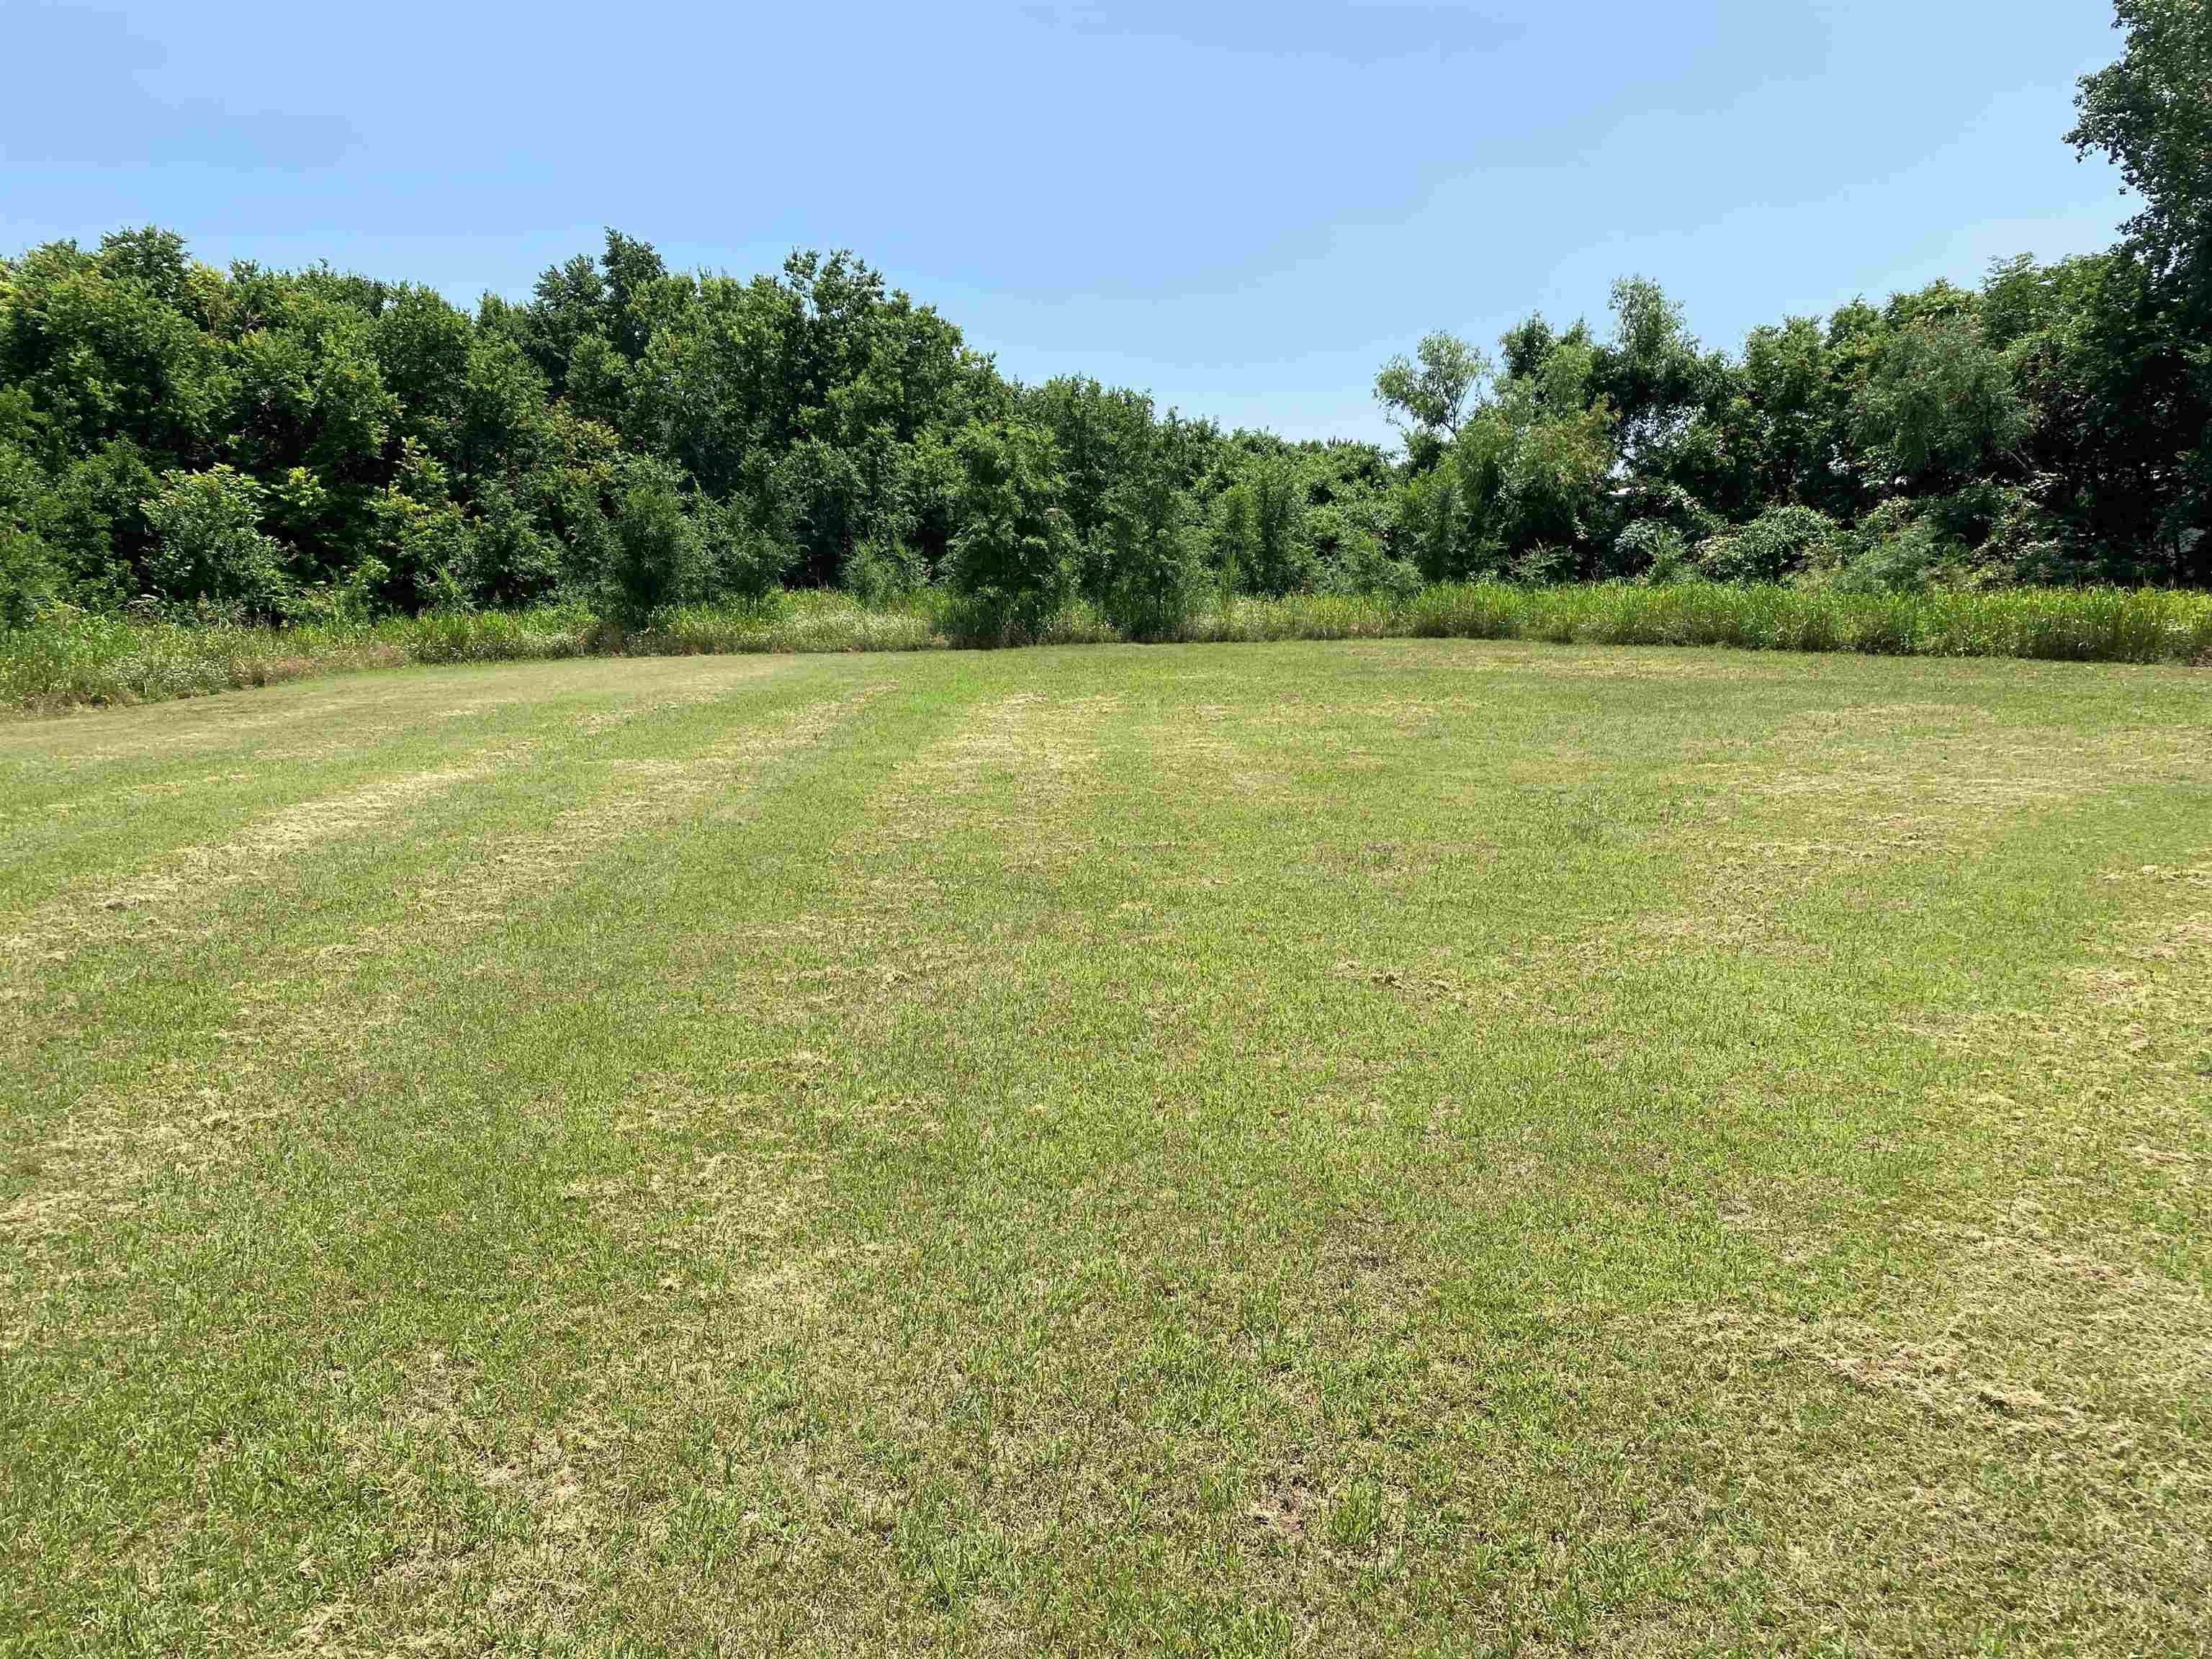 Dream big with this 2.5 acre lot located along the central business corridor of Arkansas City. This large lot has entry access to North Summit Street and expands to a level clearing ready for your pad work. Utilities are on site.  This property can be combined with the adjoining property (3122 N. Summit), which includes a free-standing commercial building, for package pricing. Call for more information.